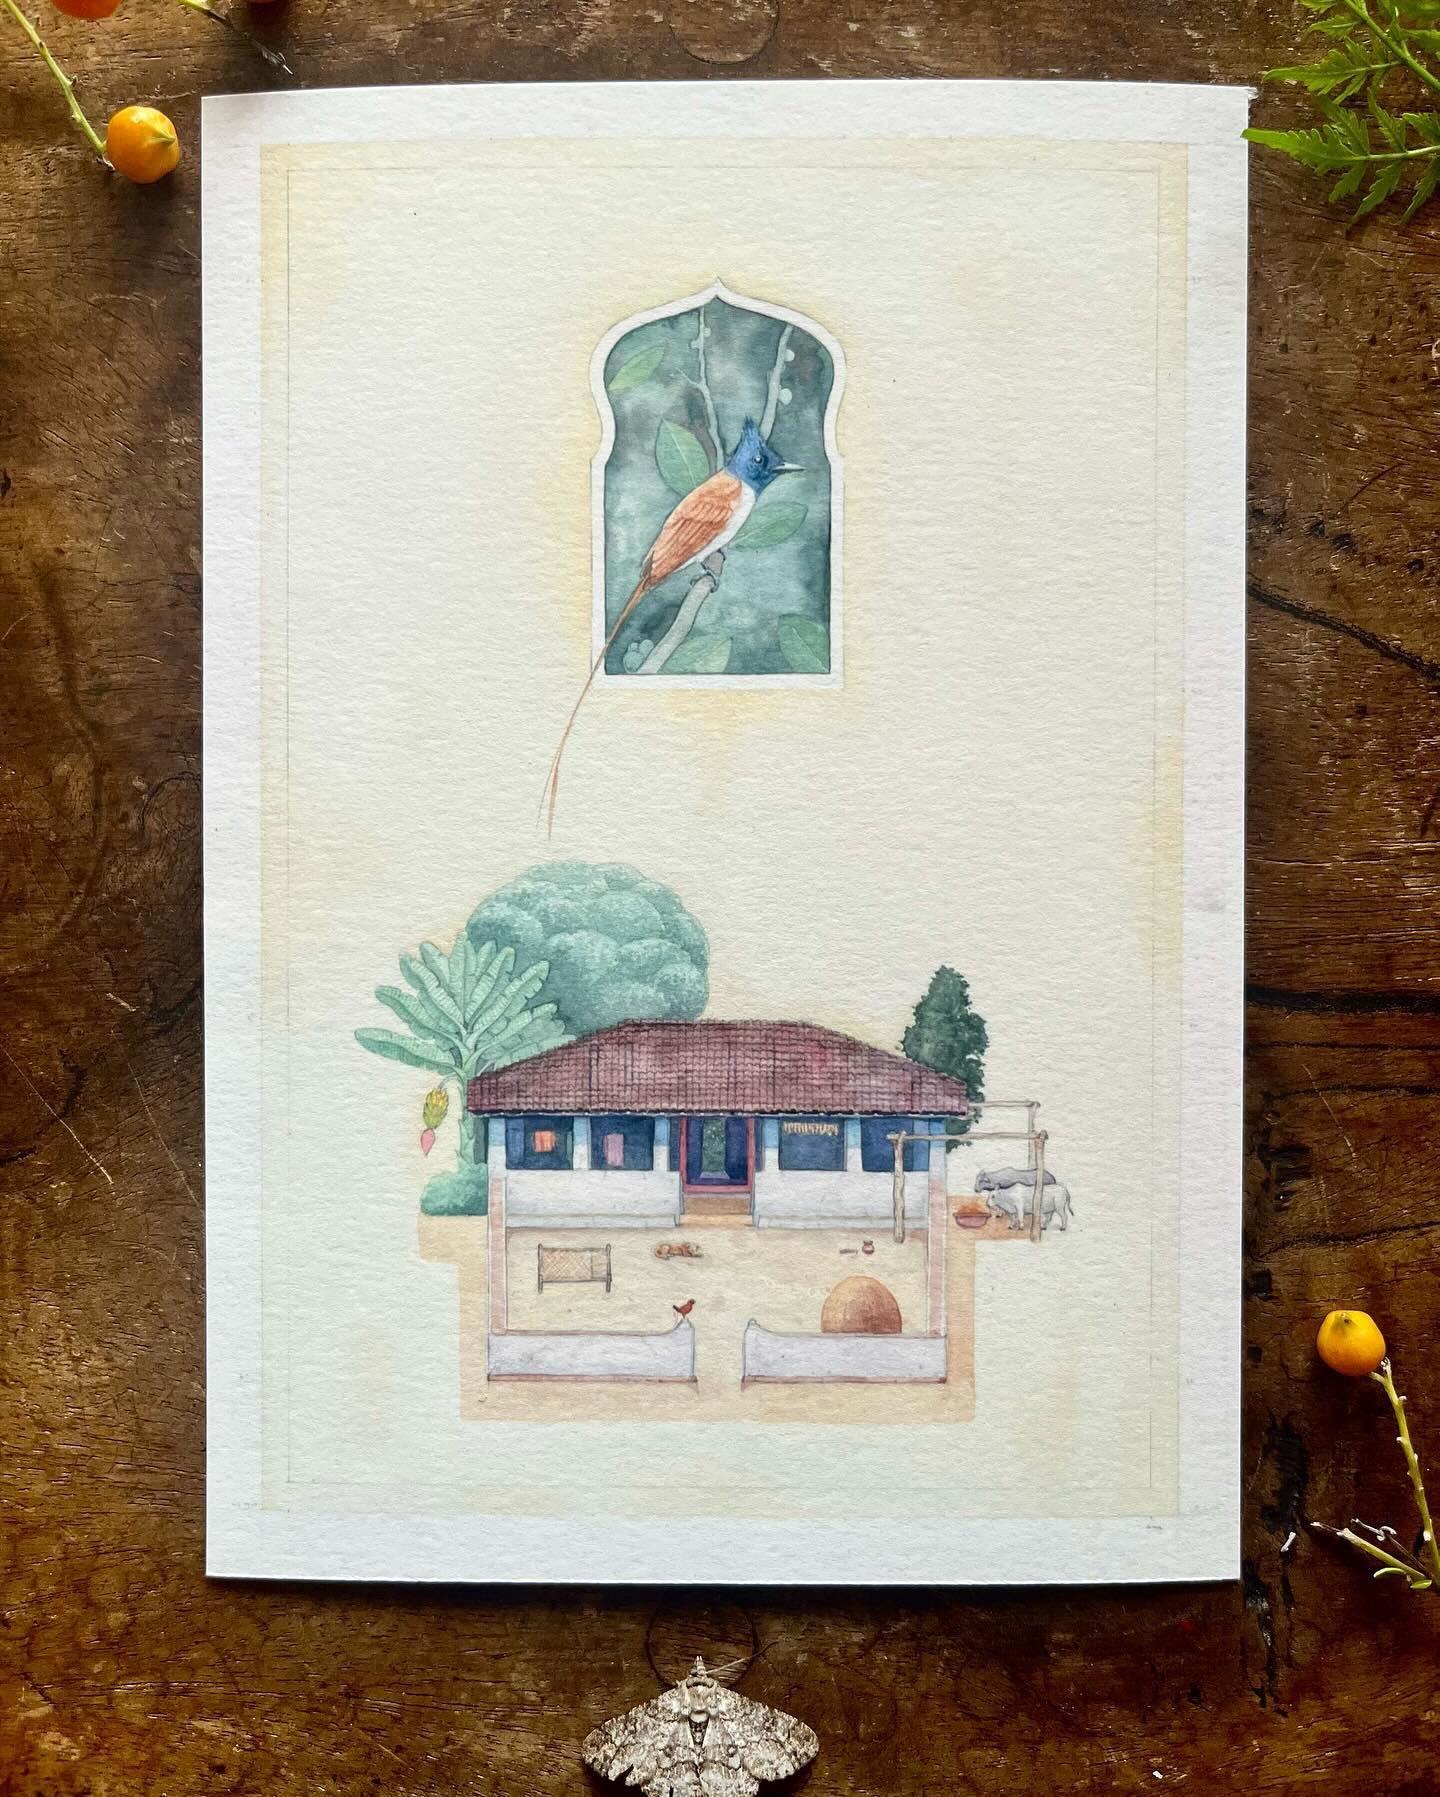 Study 2 of 3. A typical house in Pench with a typical Asian flycatcher. Another on from my travels in Central India. This is a step towards something bigger and more complex. 

#house #flycatcher #penchnationalpark